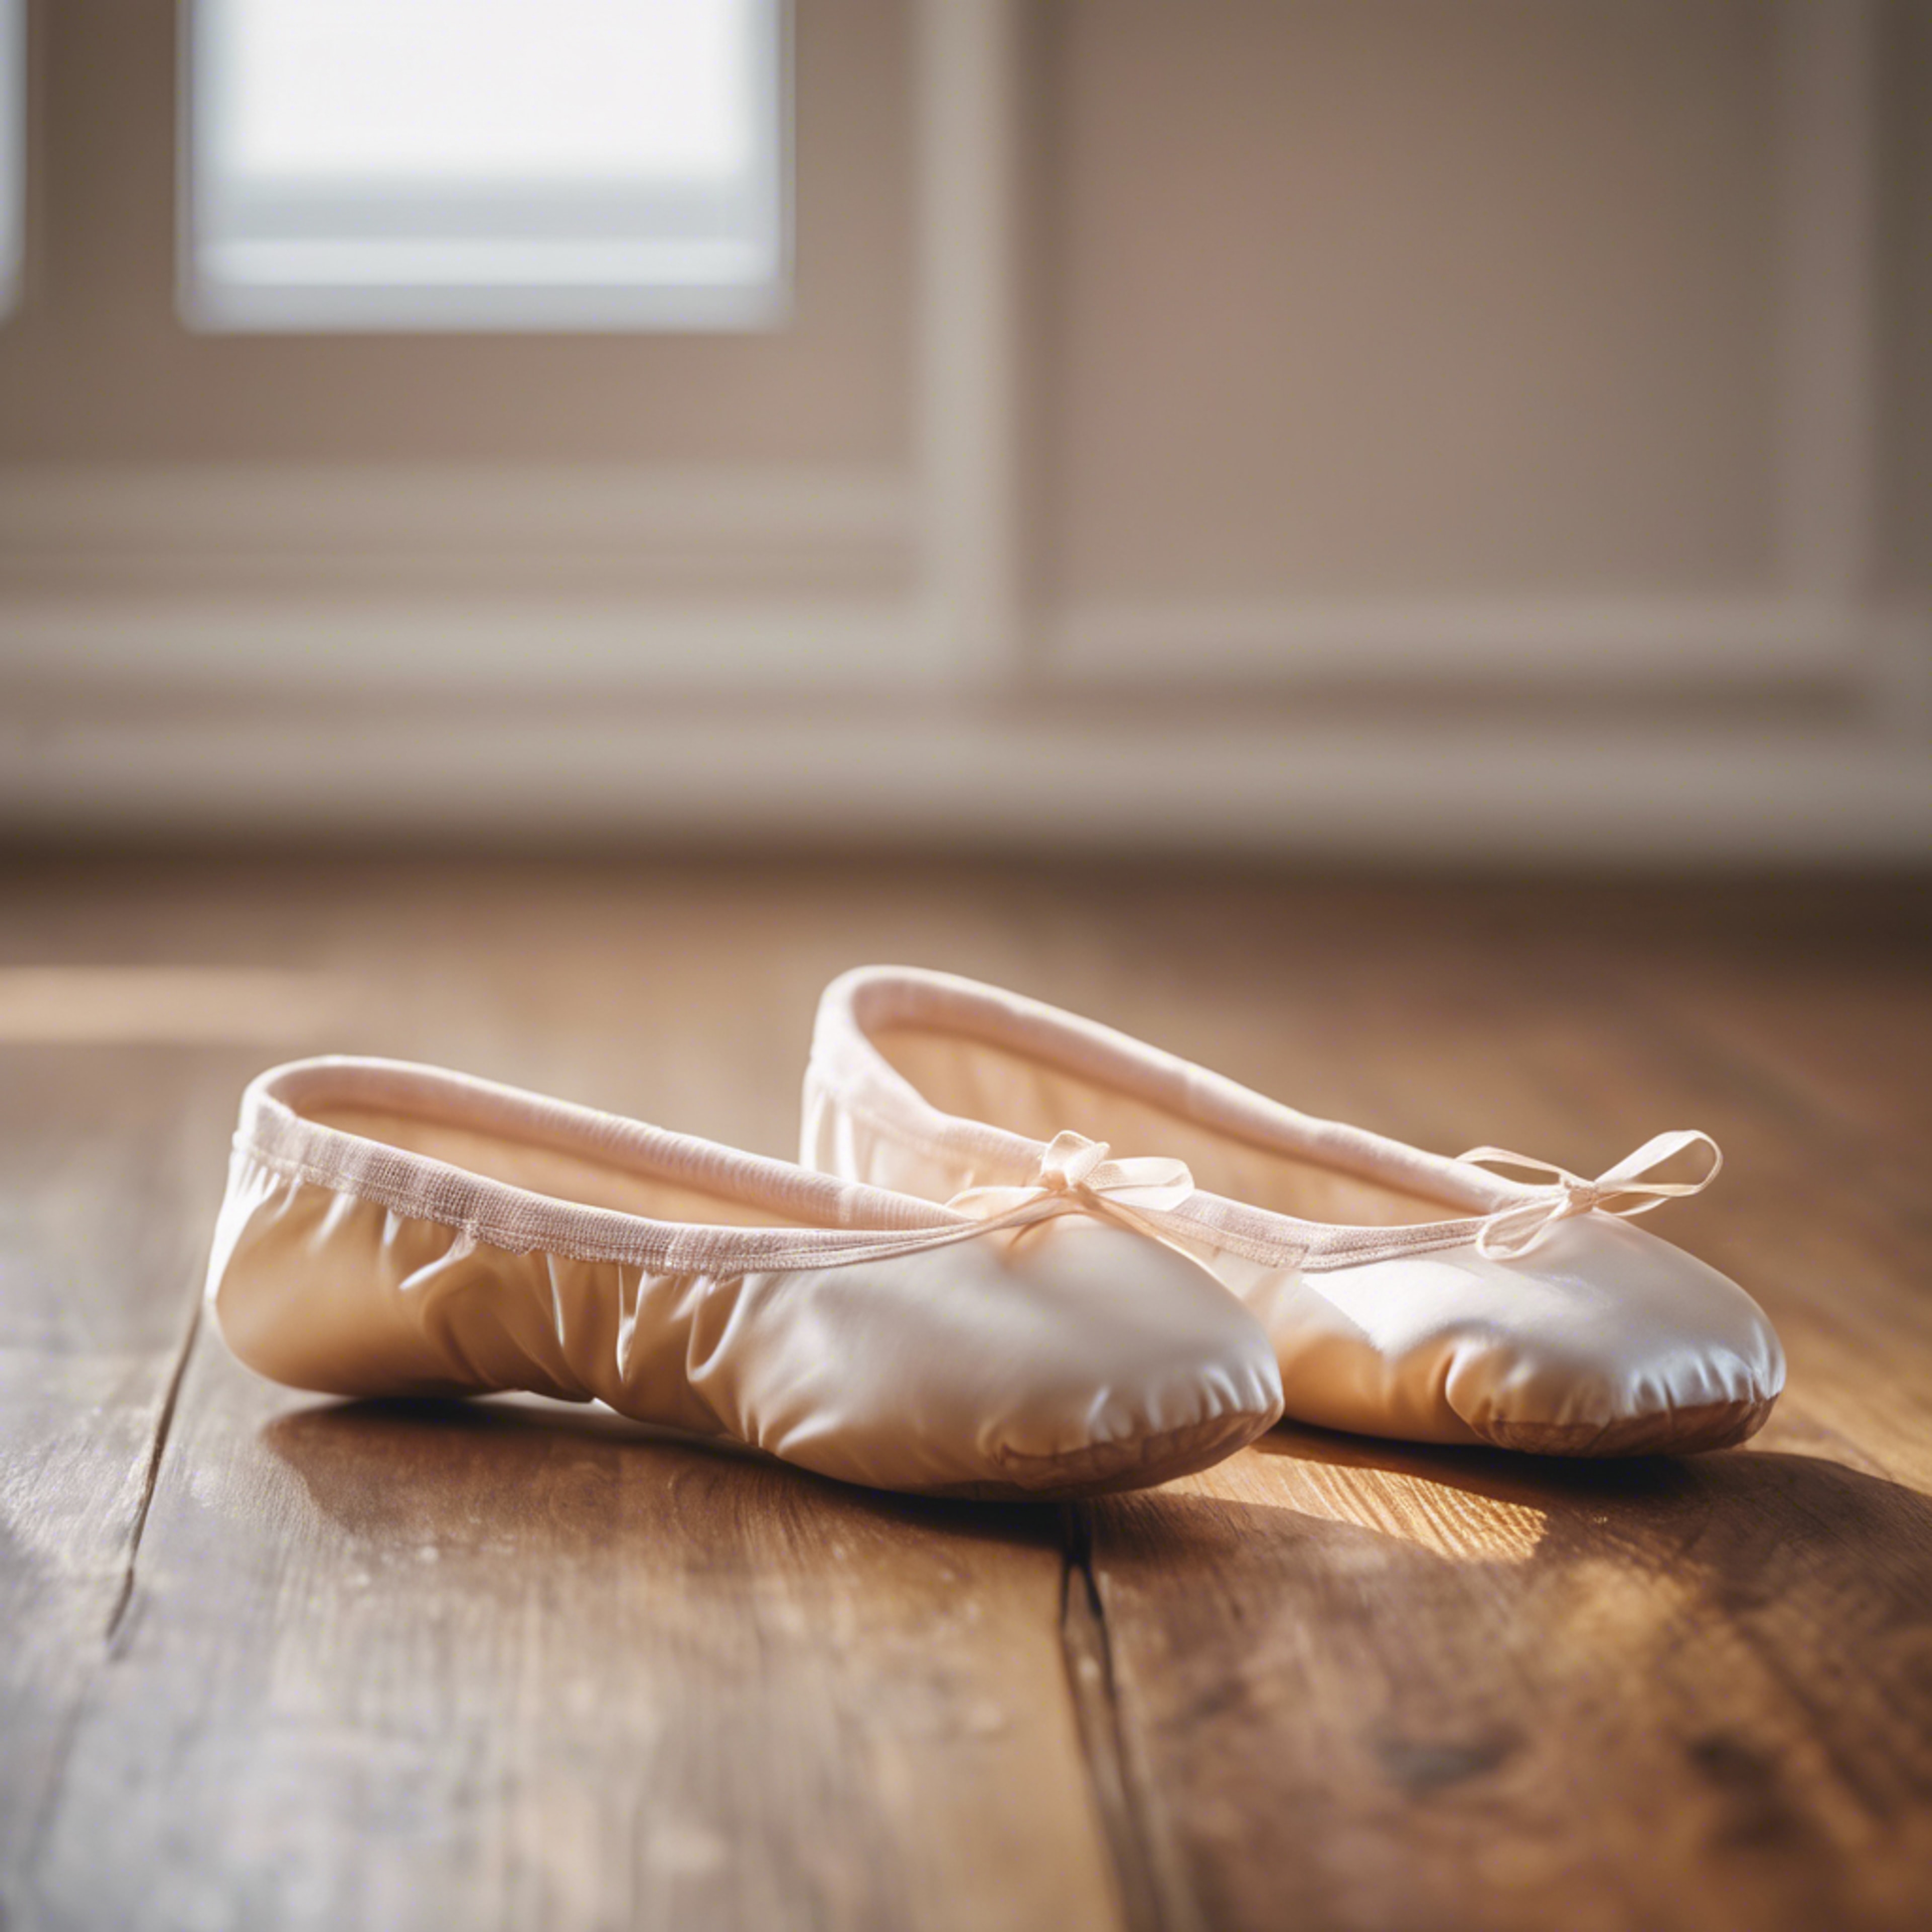 Close up of a pair of cream-colored ballet slippers on a hardwood floor. Hình nền[4efd7208256149a9b923]